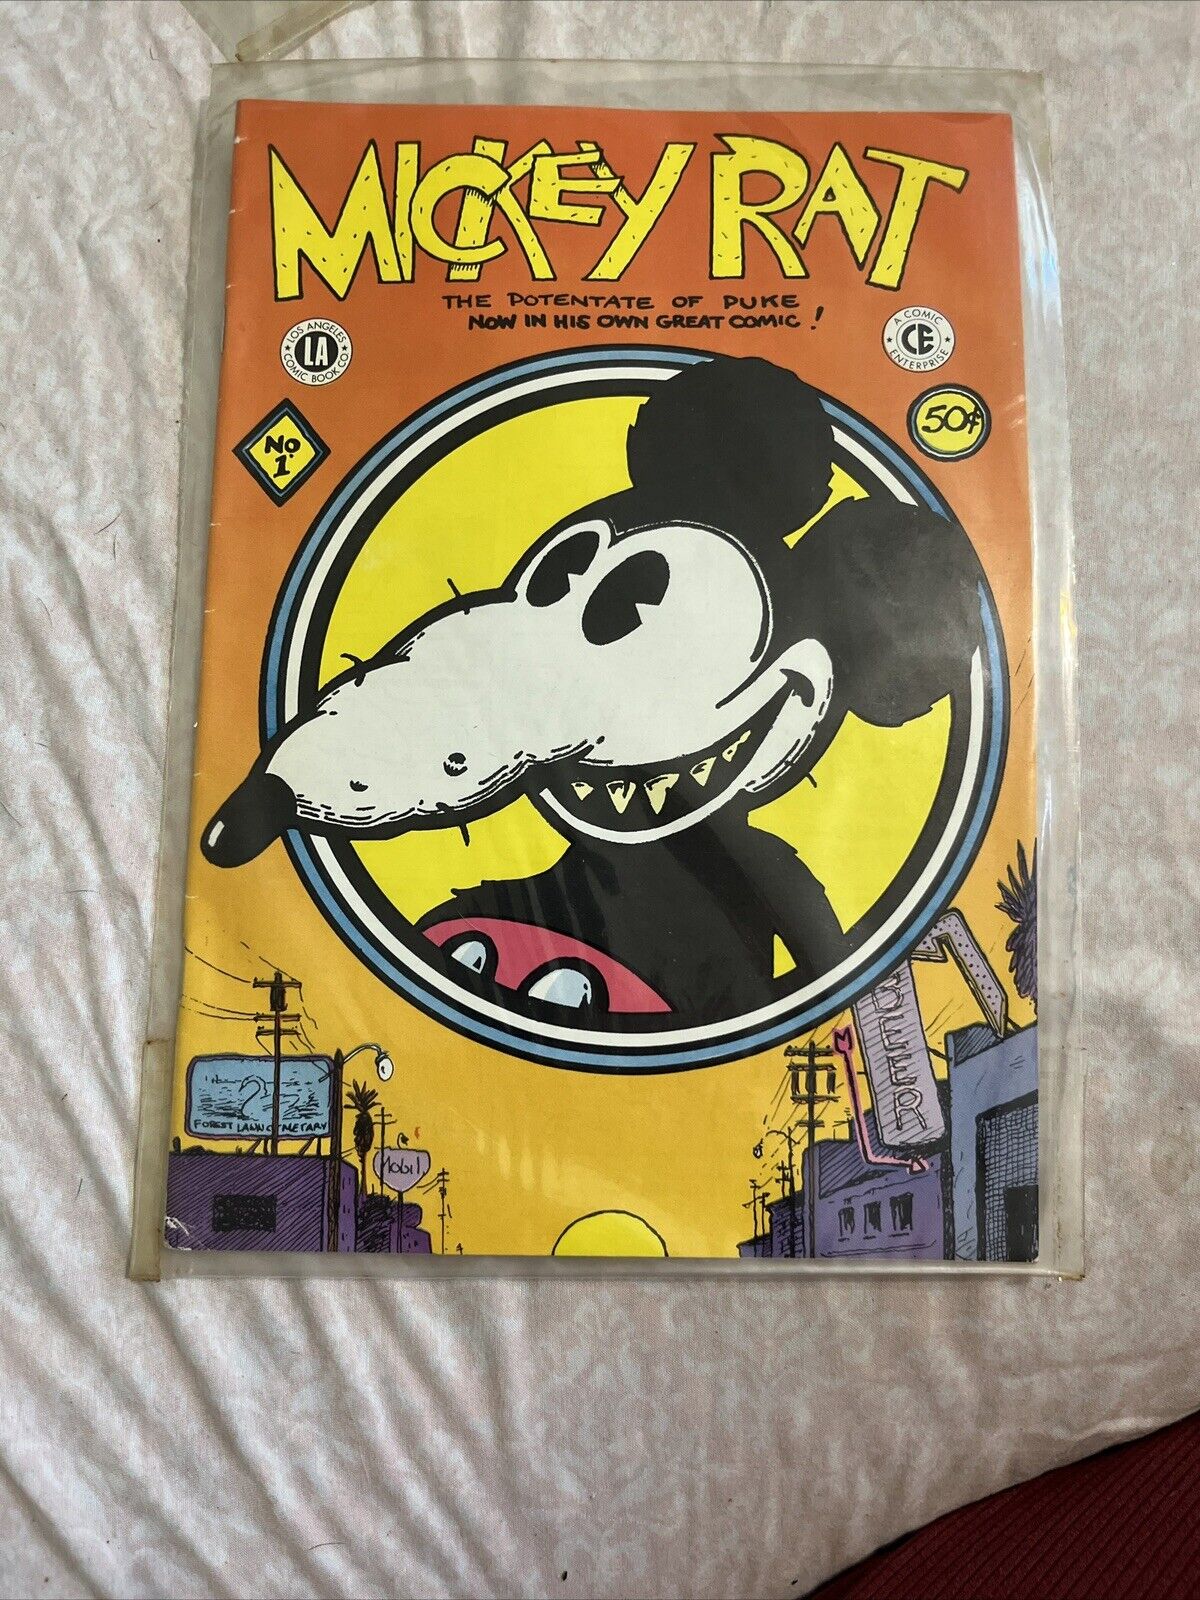 MICKEY RAT COMIC #1, 1972, ONLY PRINTING, ROBERT ARMSTRONG, UNDERGROUND COMIC